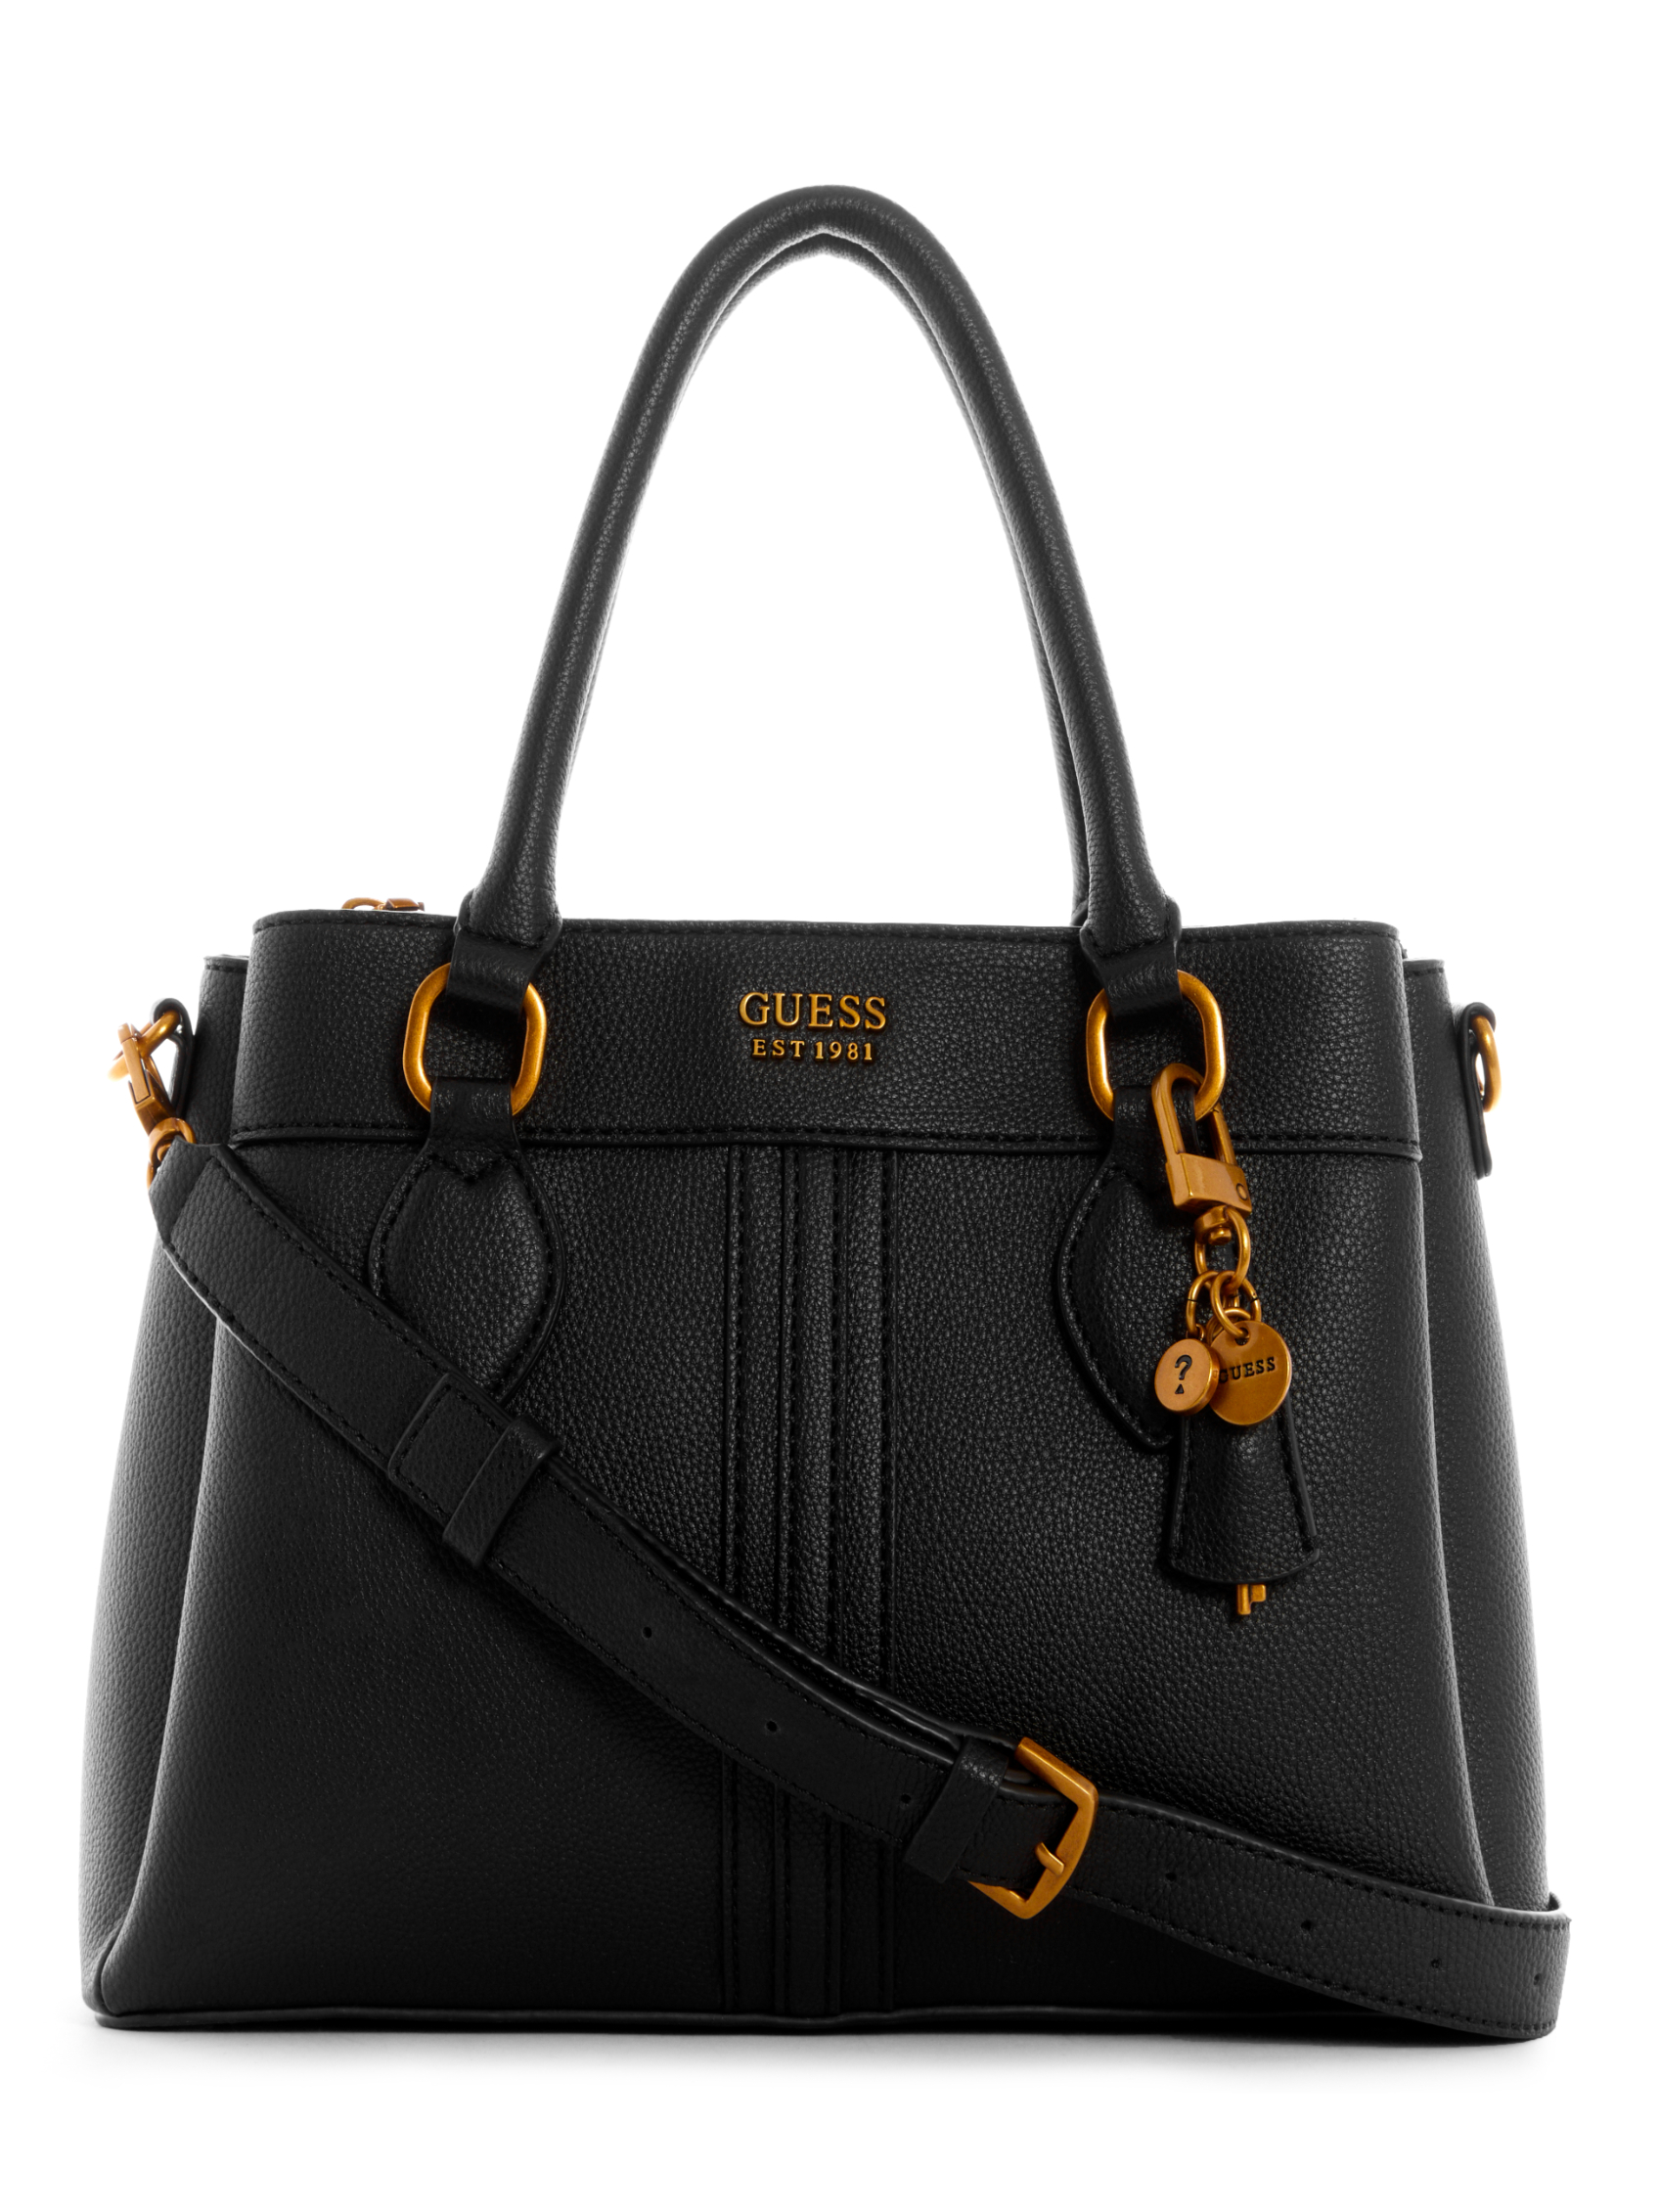 KASINTA 3 COMPARTMENT SATCHEL | Guess Philippines